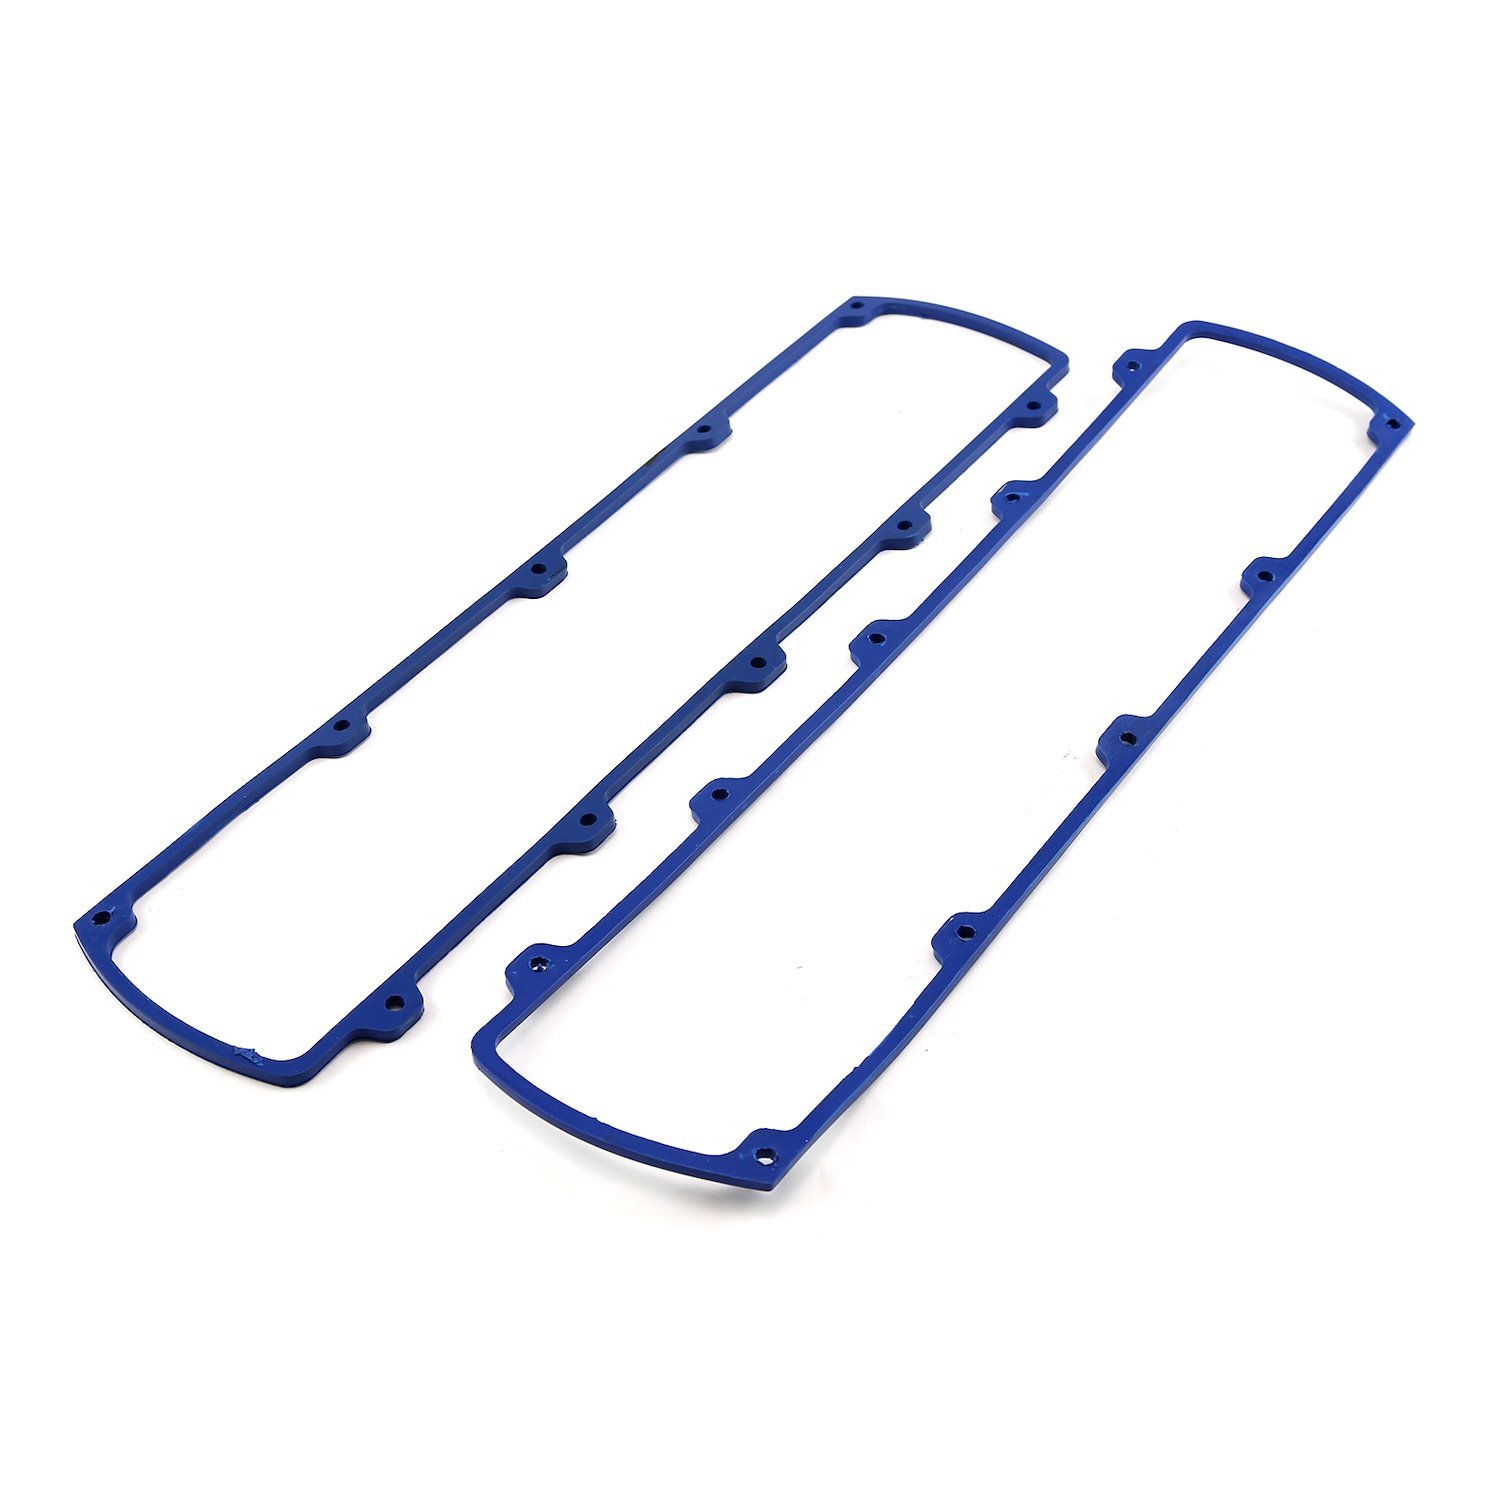 OLDSMOBILE 400 425 455 BLUE 3/16 THICK RUBBER STEEL CORE VALVE COVER GASKET SET